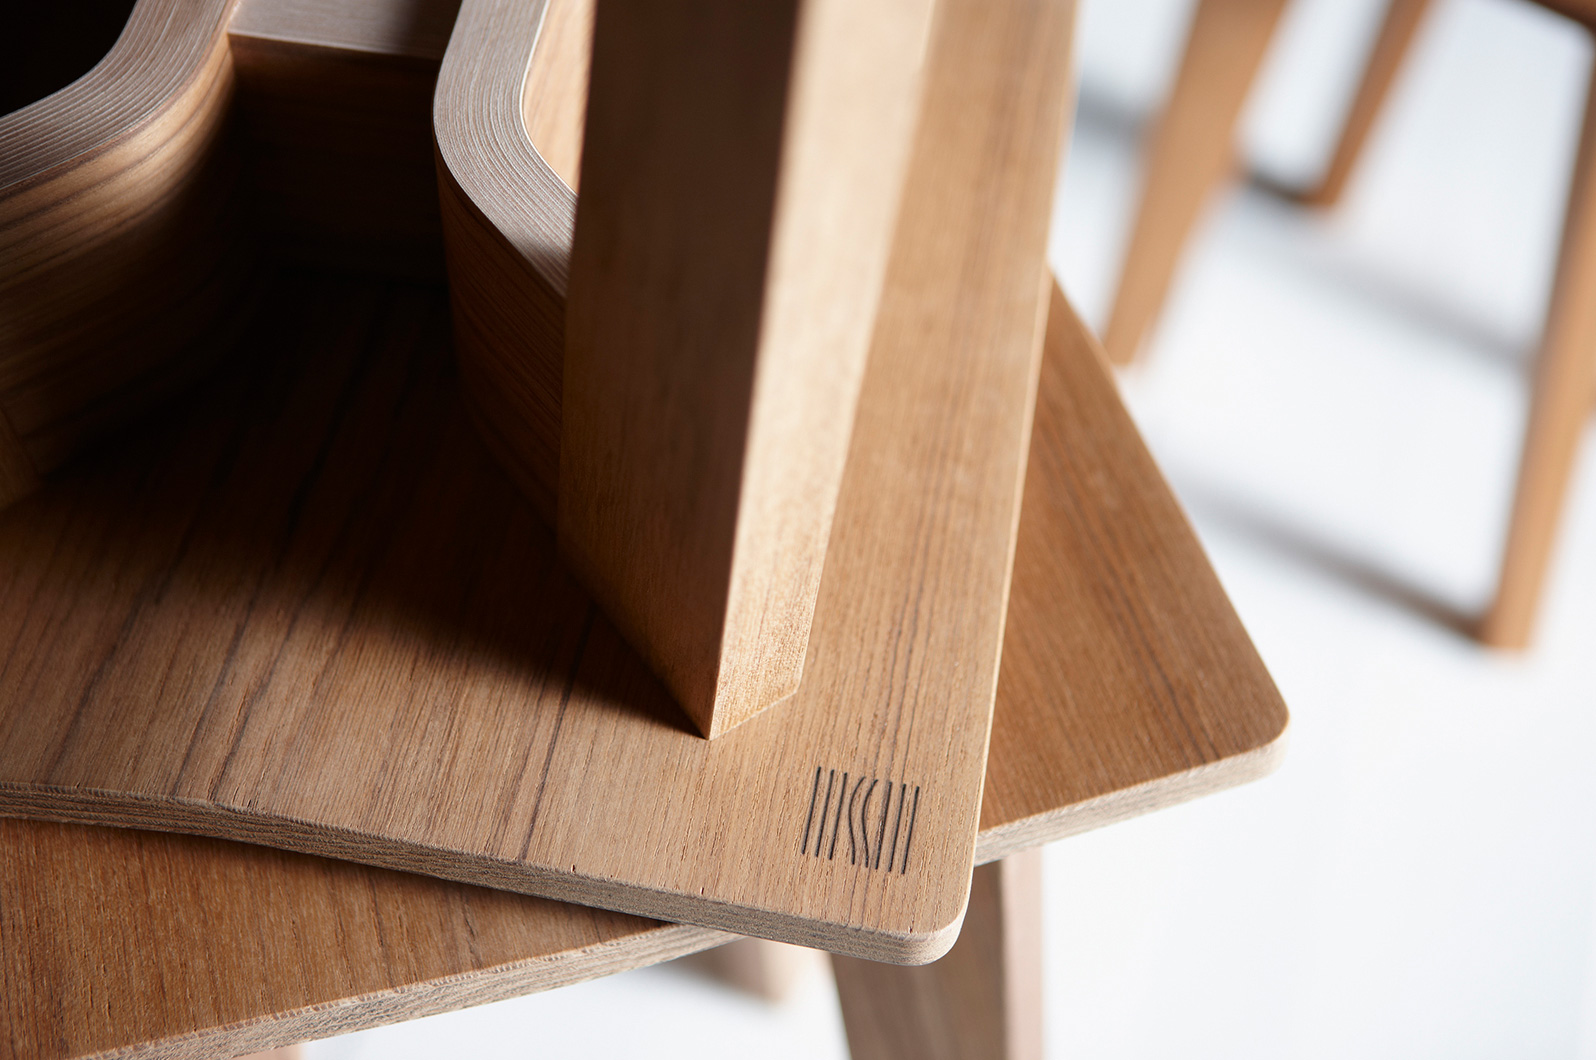 Detail shot of the stools using their shapes in the composition.